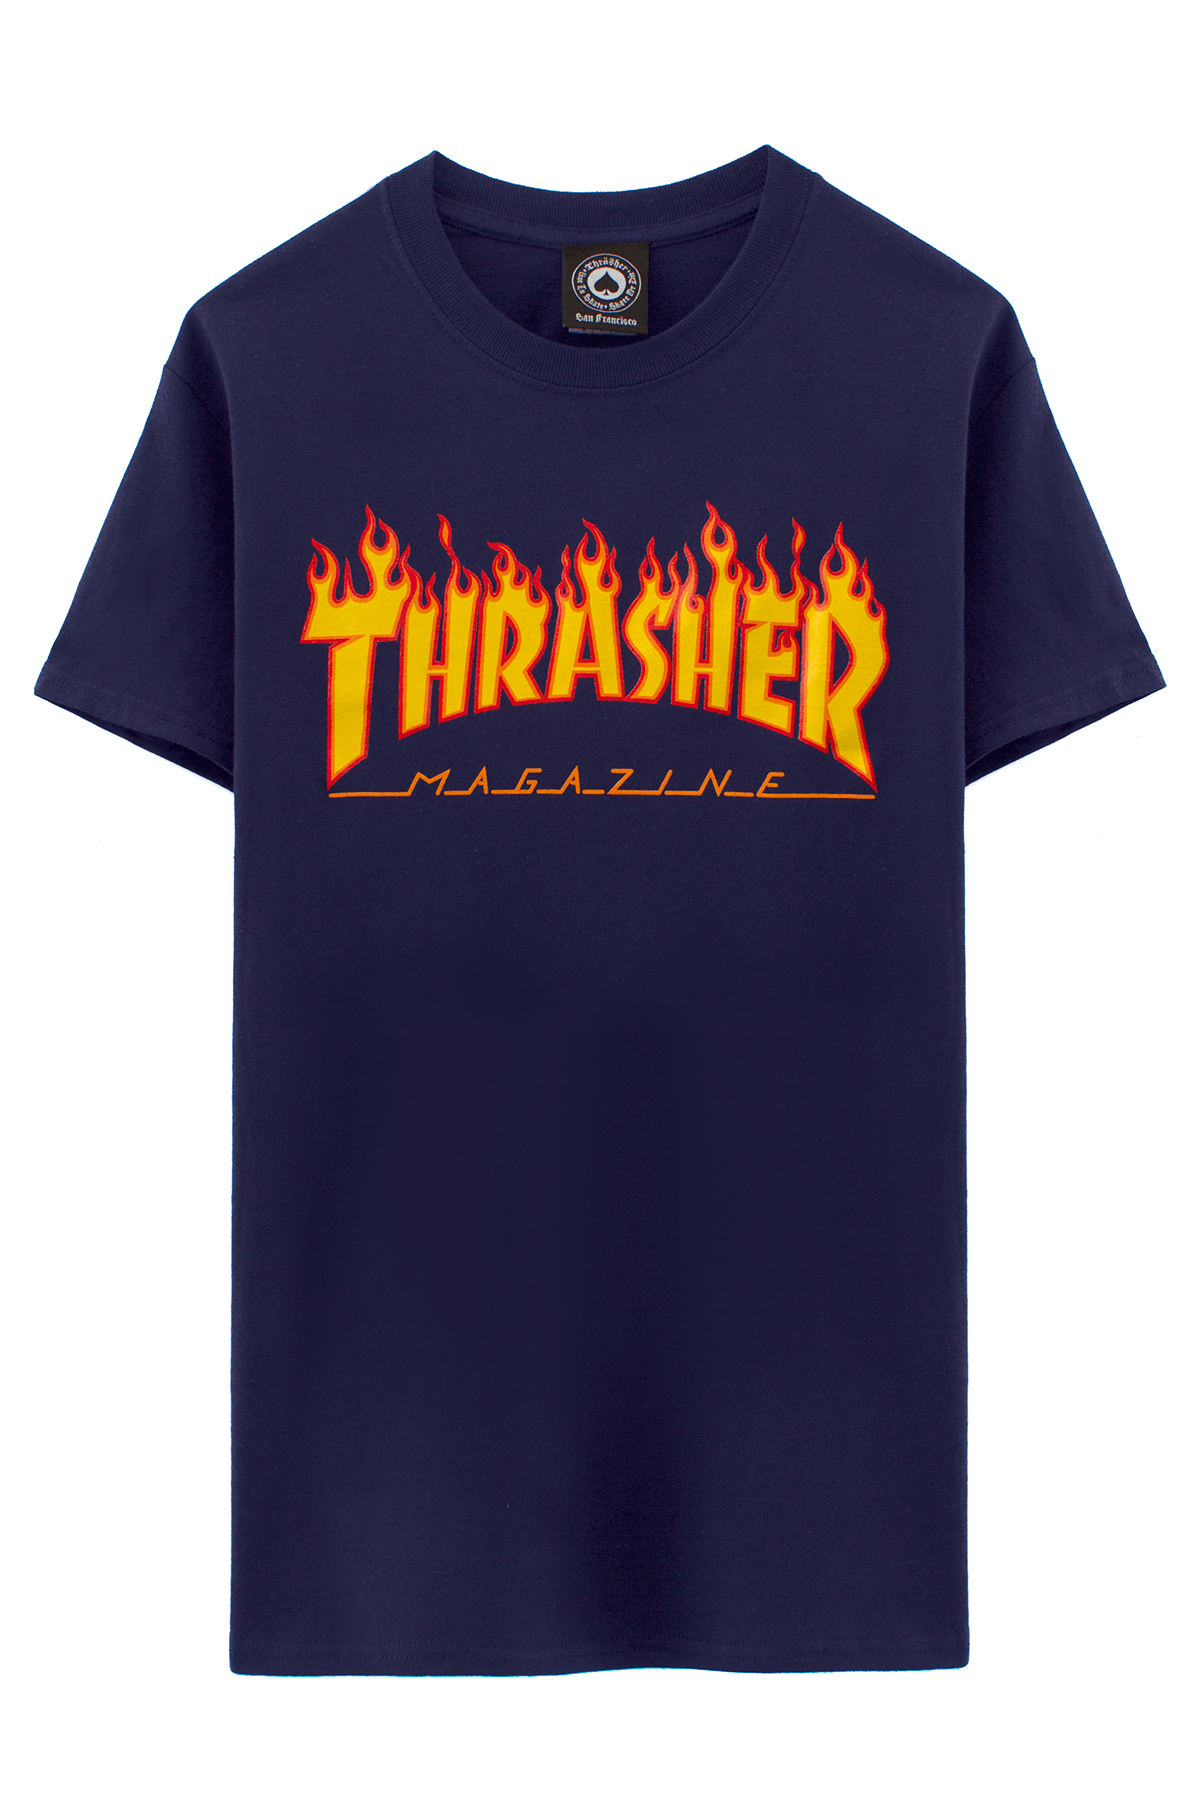 Blue G with Flame Logo - THRASHER NAVY FLAME LOGO T-SHIRT Navy blue T-shirt with Thrasher ...